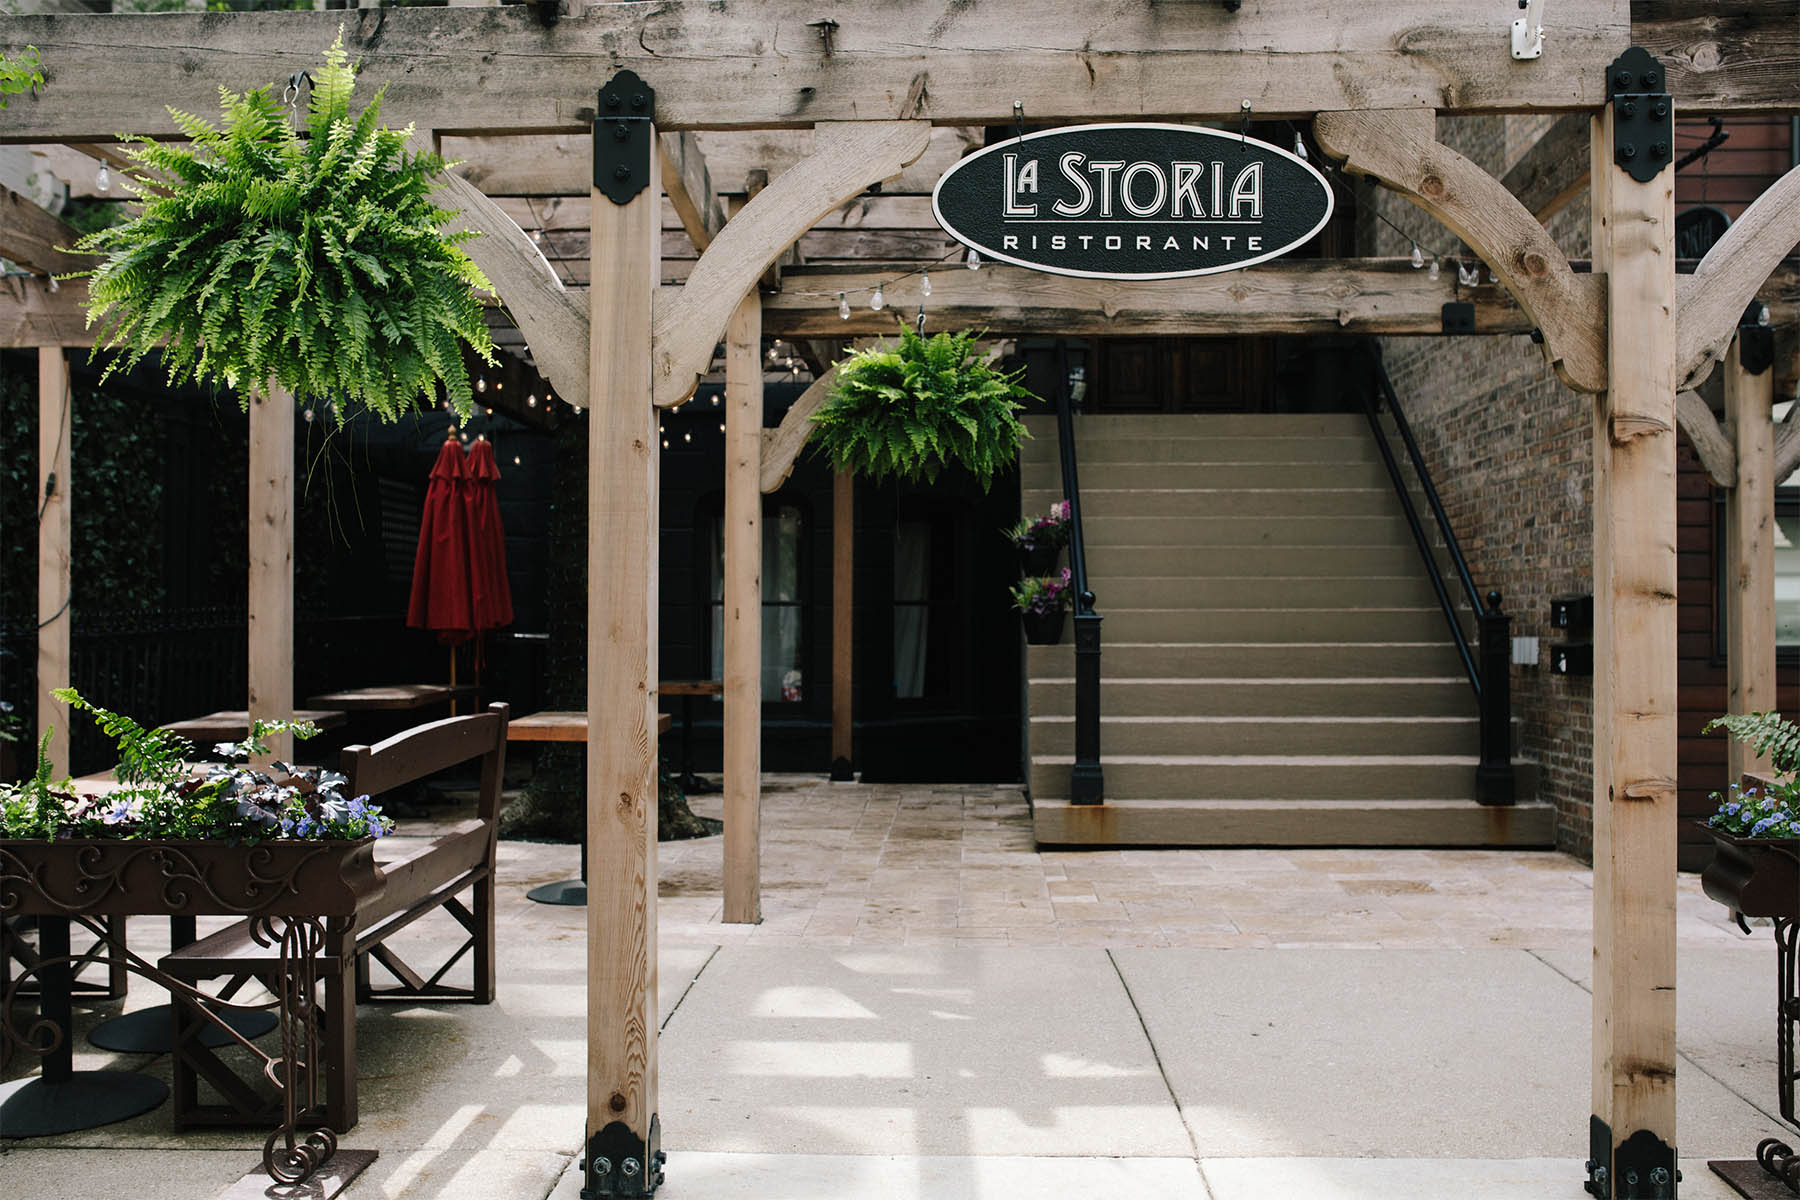 La Storia Re-Opens with New Chef and New Menus